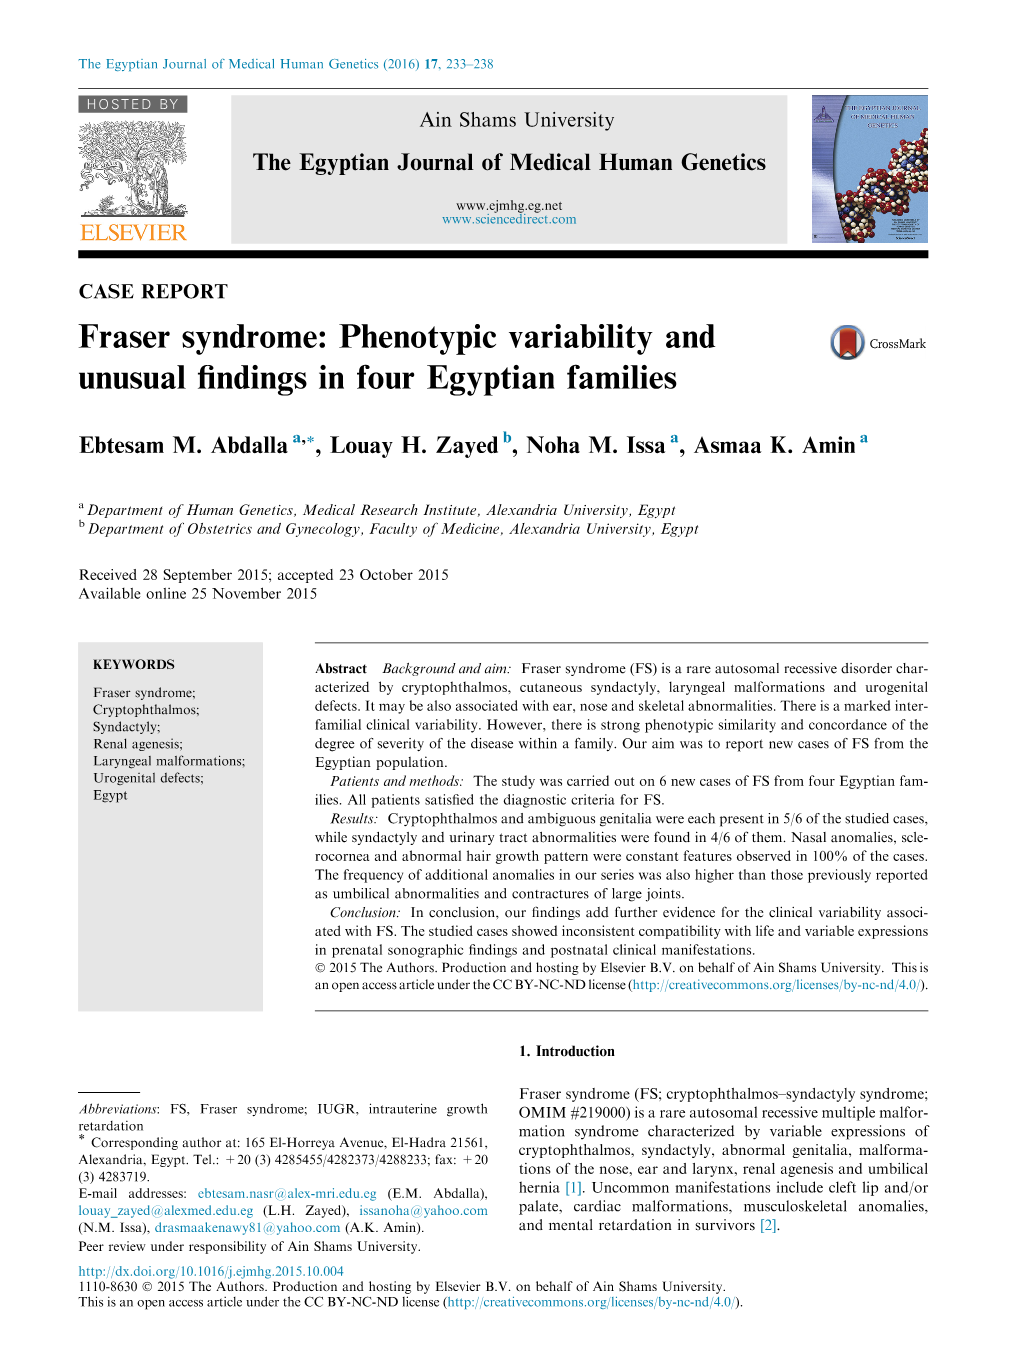 Fraser Syndrome: Phenotypic Variability and Unusual ﬁndings in Four Egyptian Families